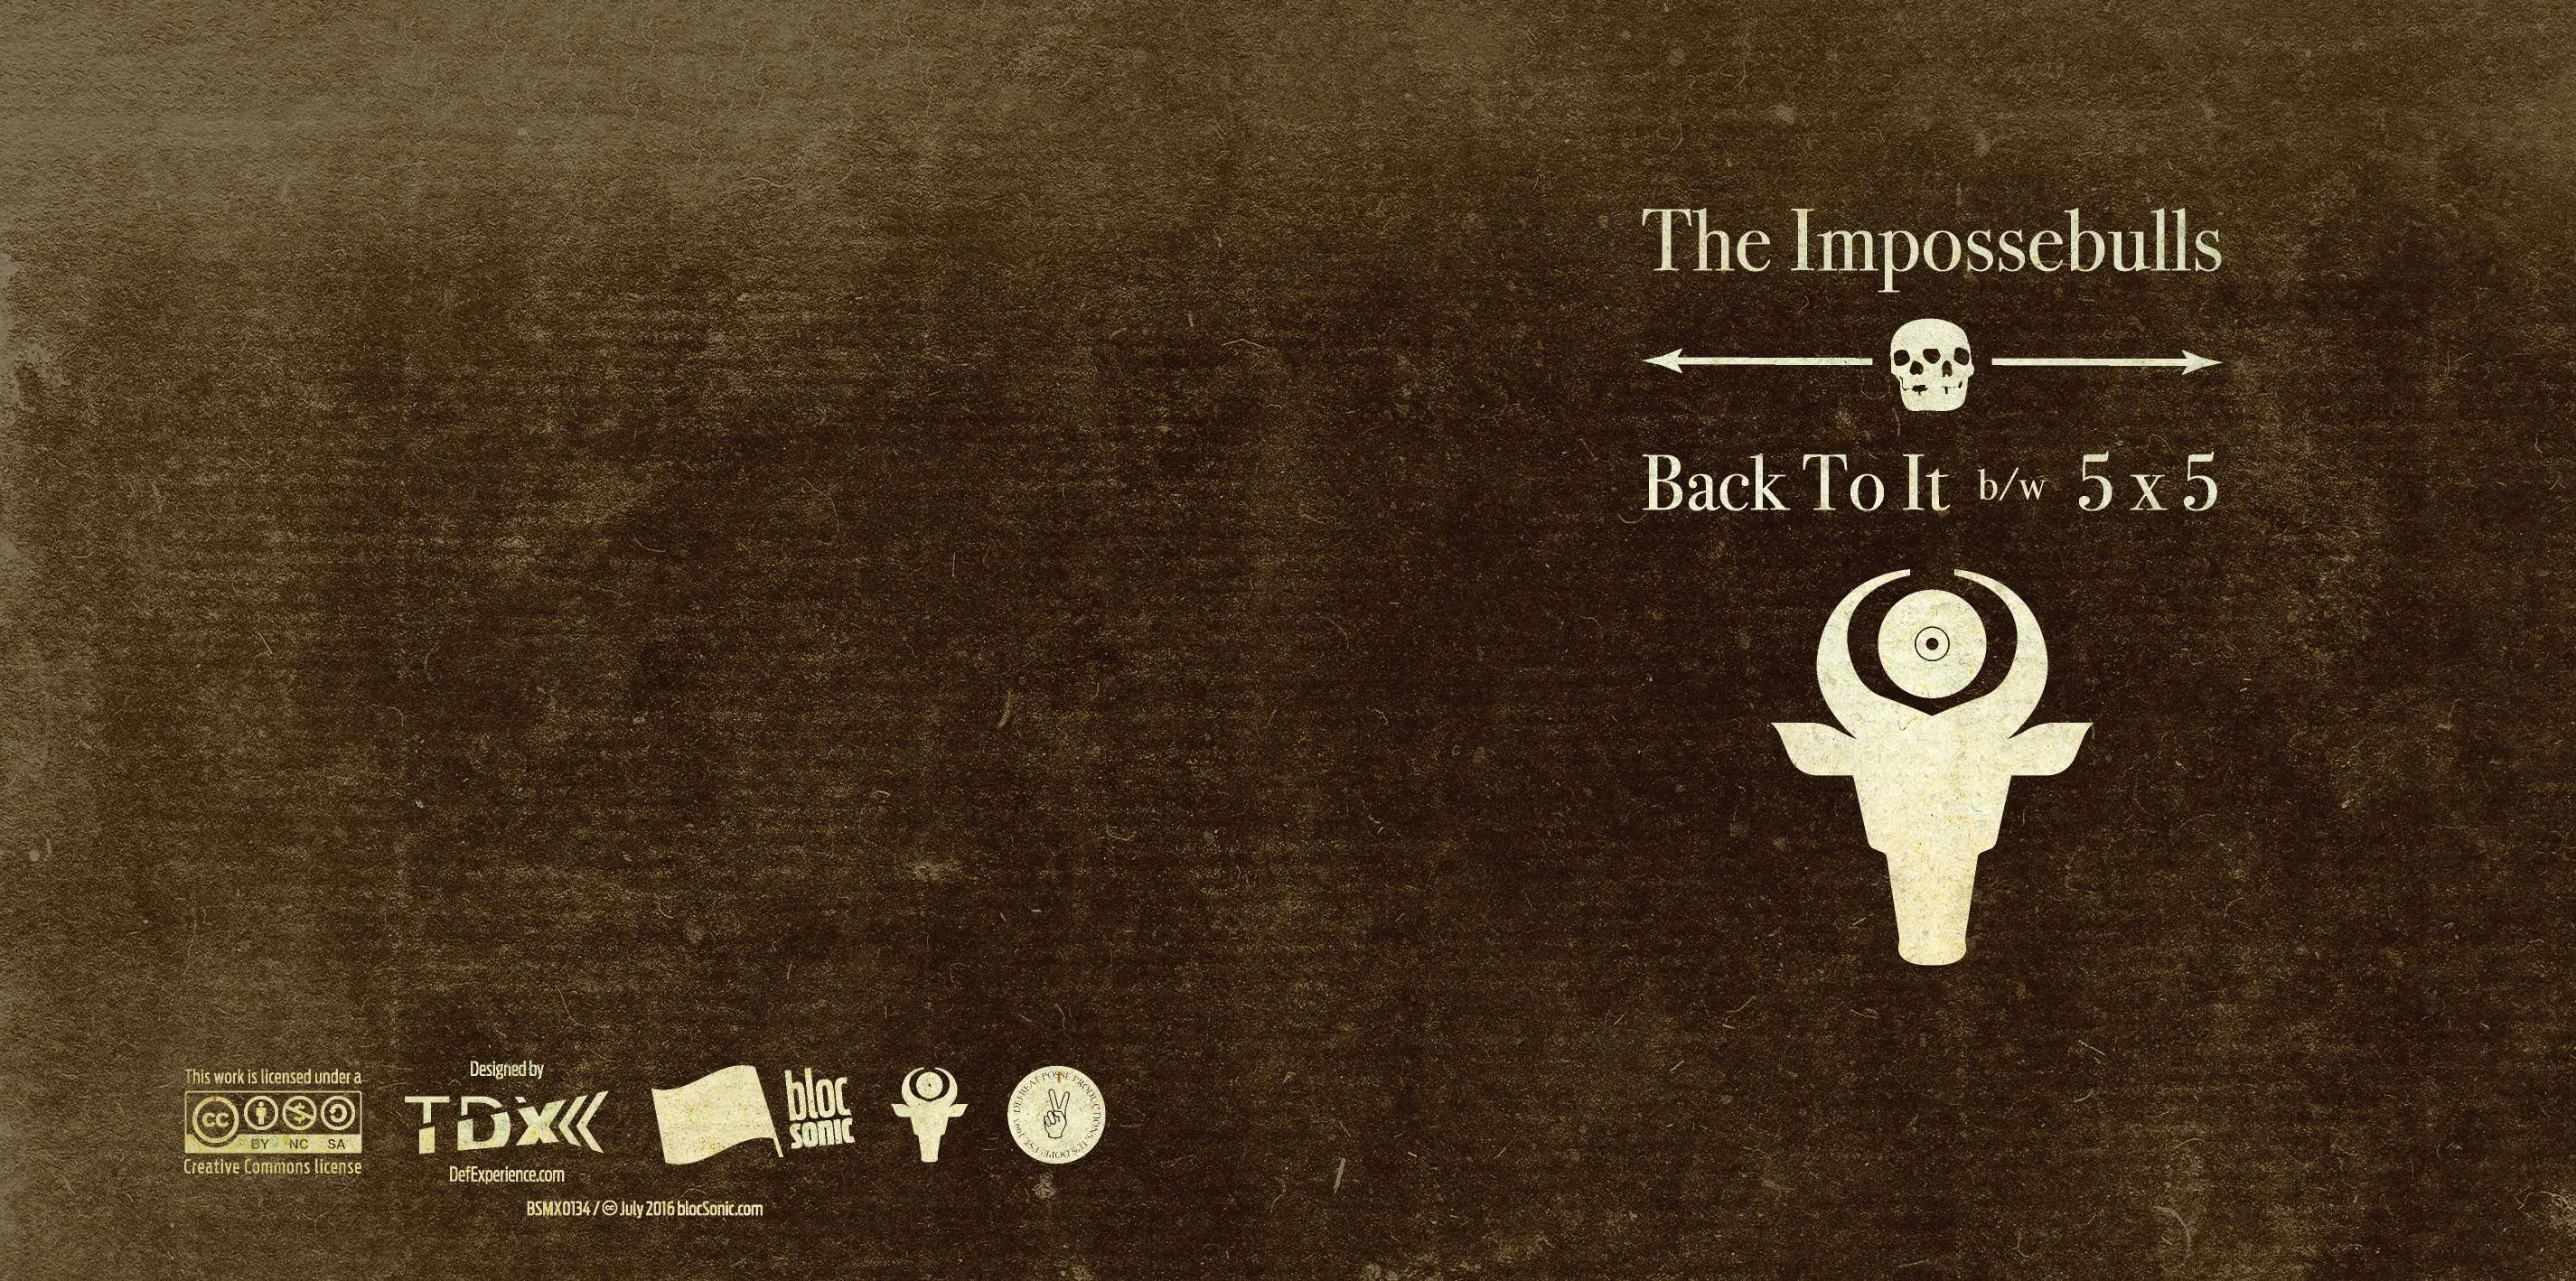 Album insert for “Back To It b/w 5 x 5” by The Impossebulls